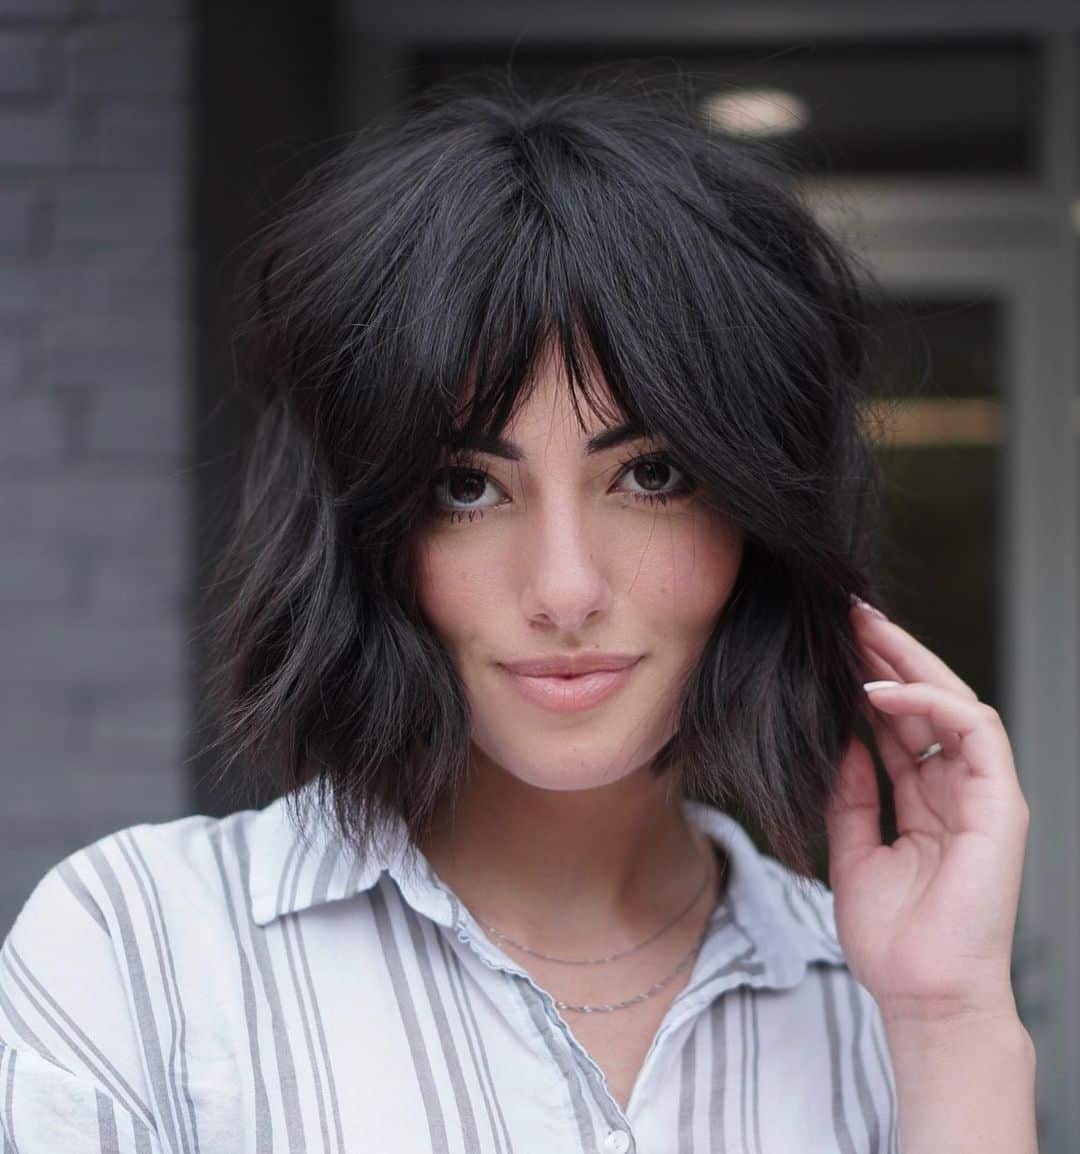 Play with the chin-length shag cut by pairing it with middle-parted bangs. A hairstyle like this requires a specific density of hair. For beauties with thick tresses, this is perfect! When styling, jazz it up with soft waves. That's how you achieve effortless beauty.